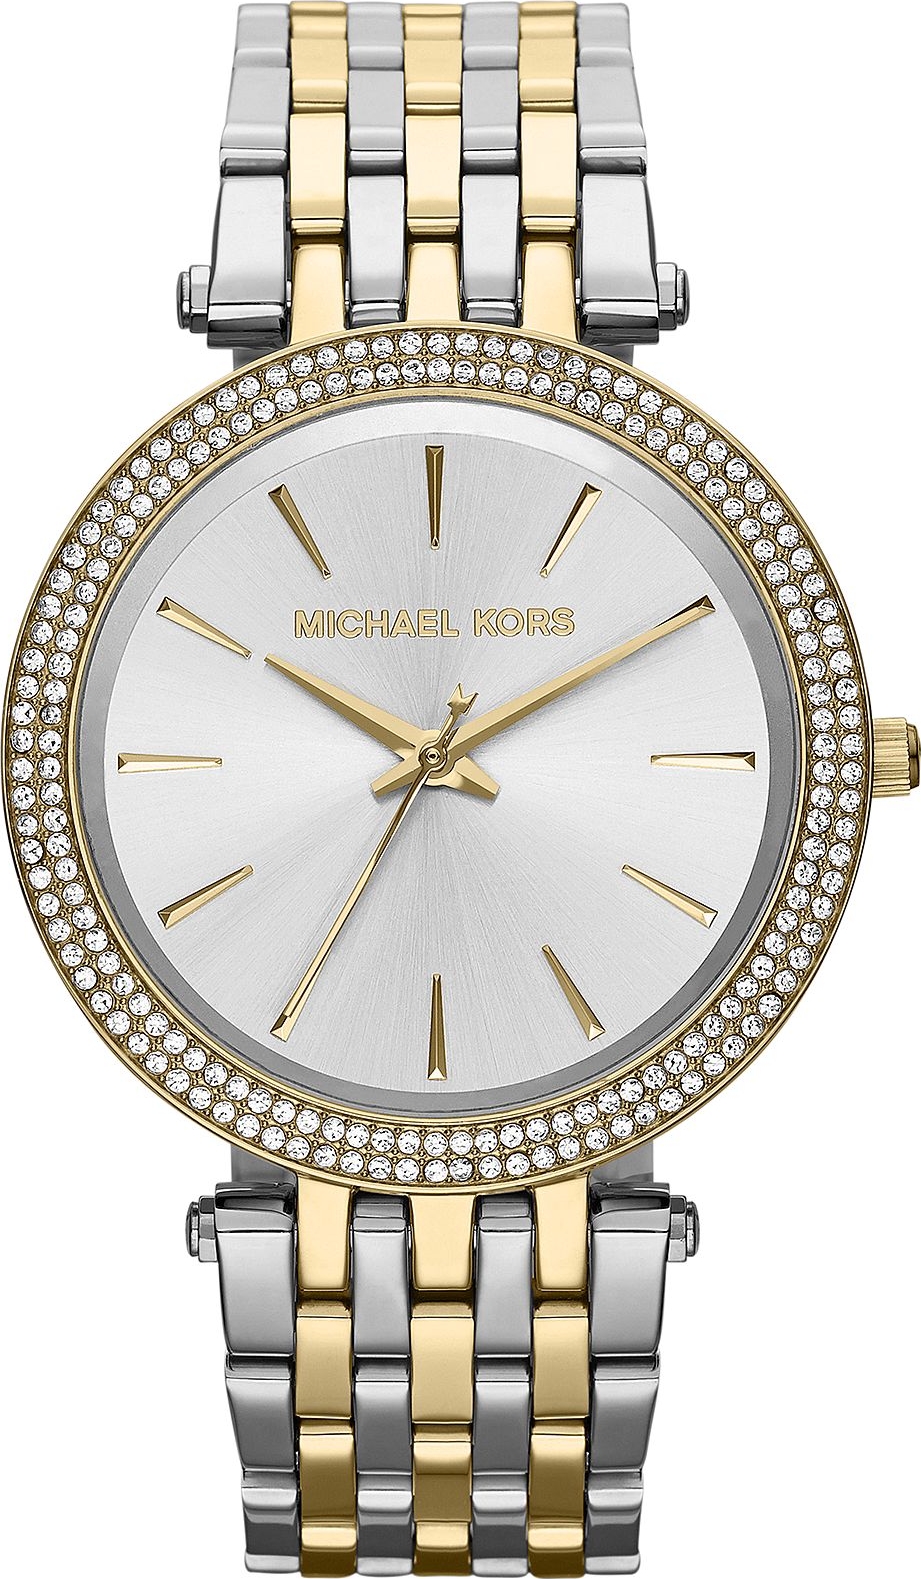 Michael Kors Watches TwoTone Chronograph with Stones  Shopping From USA